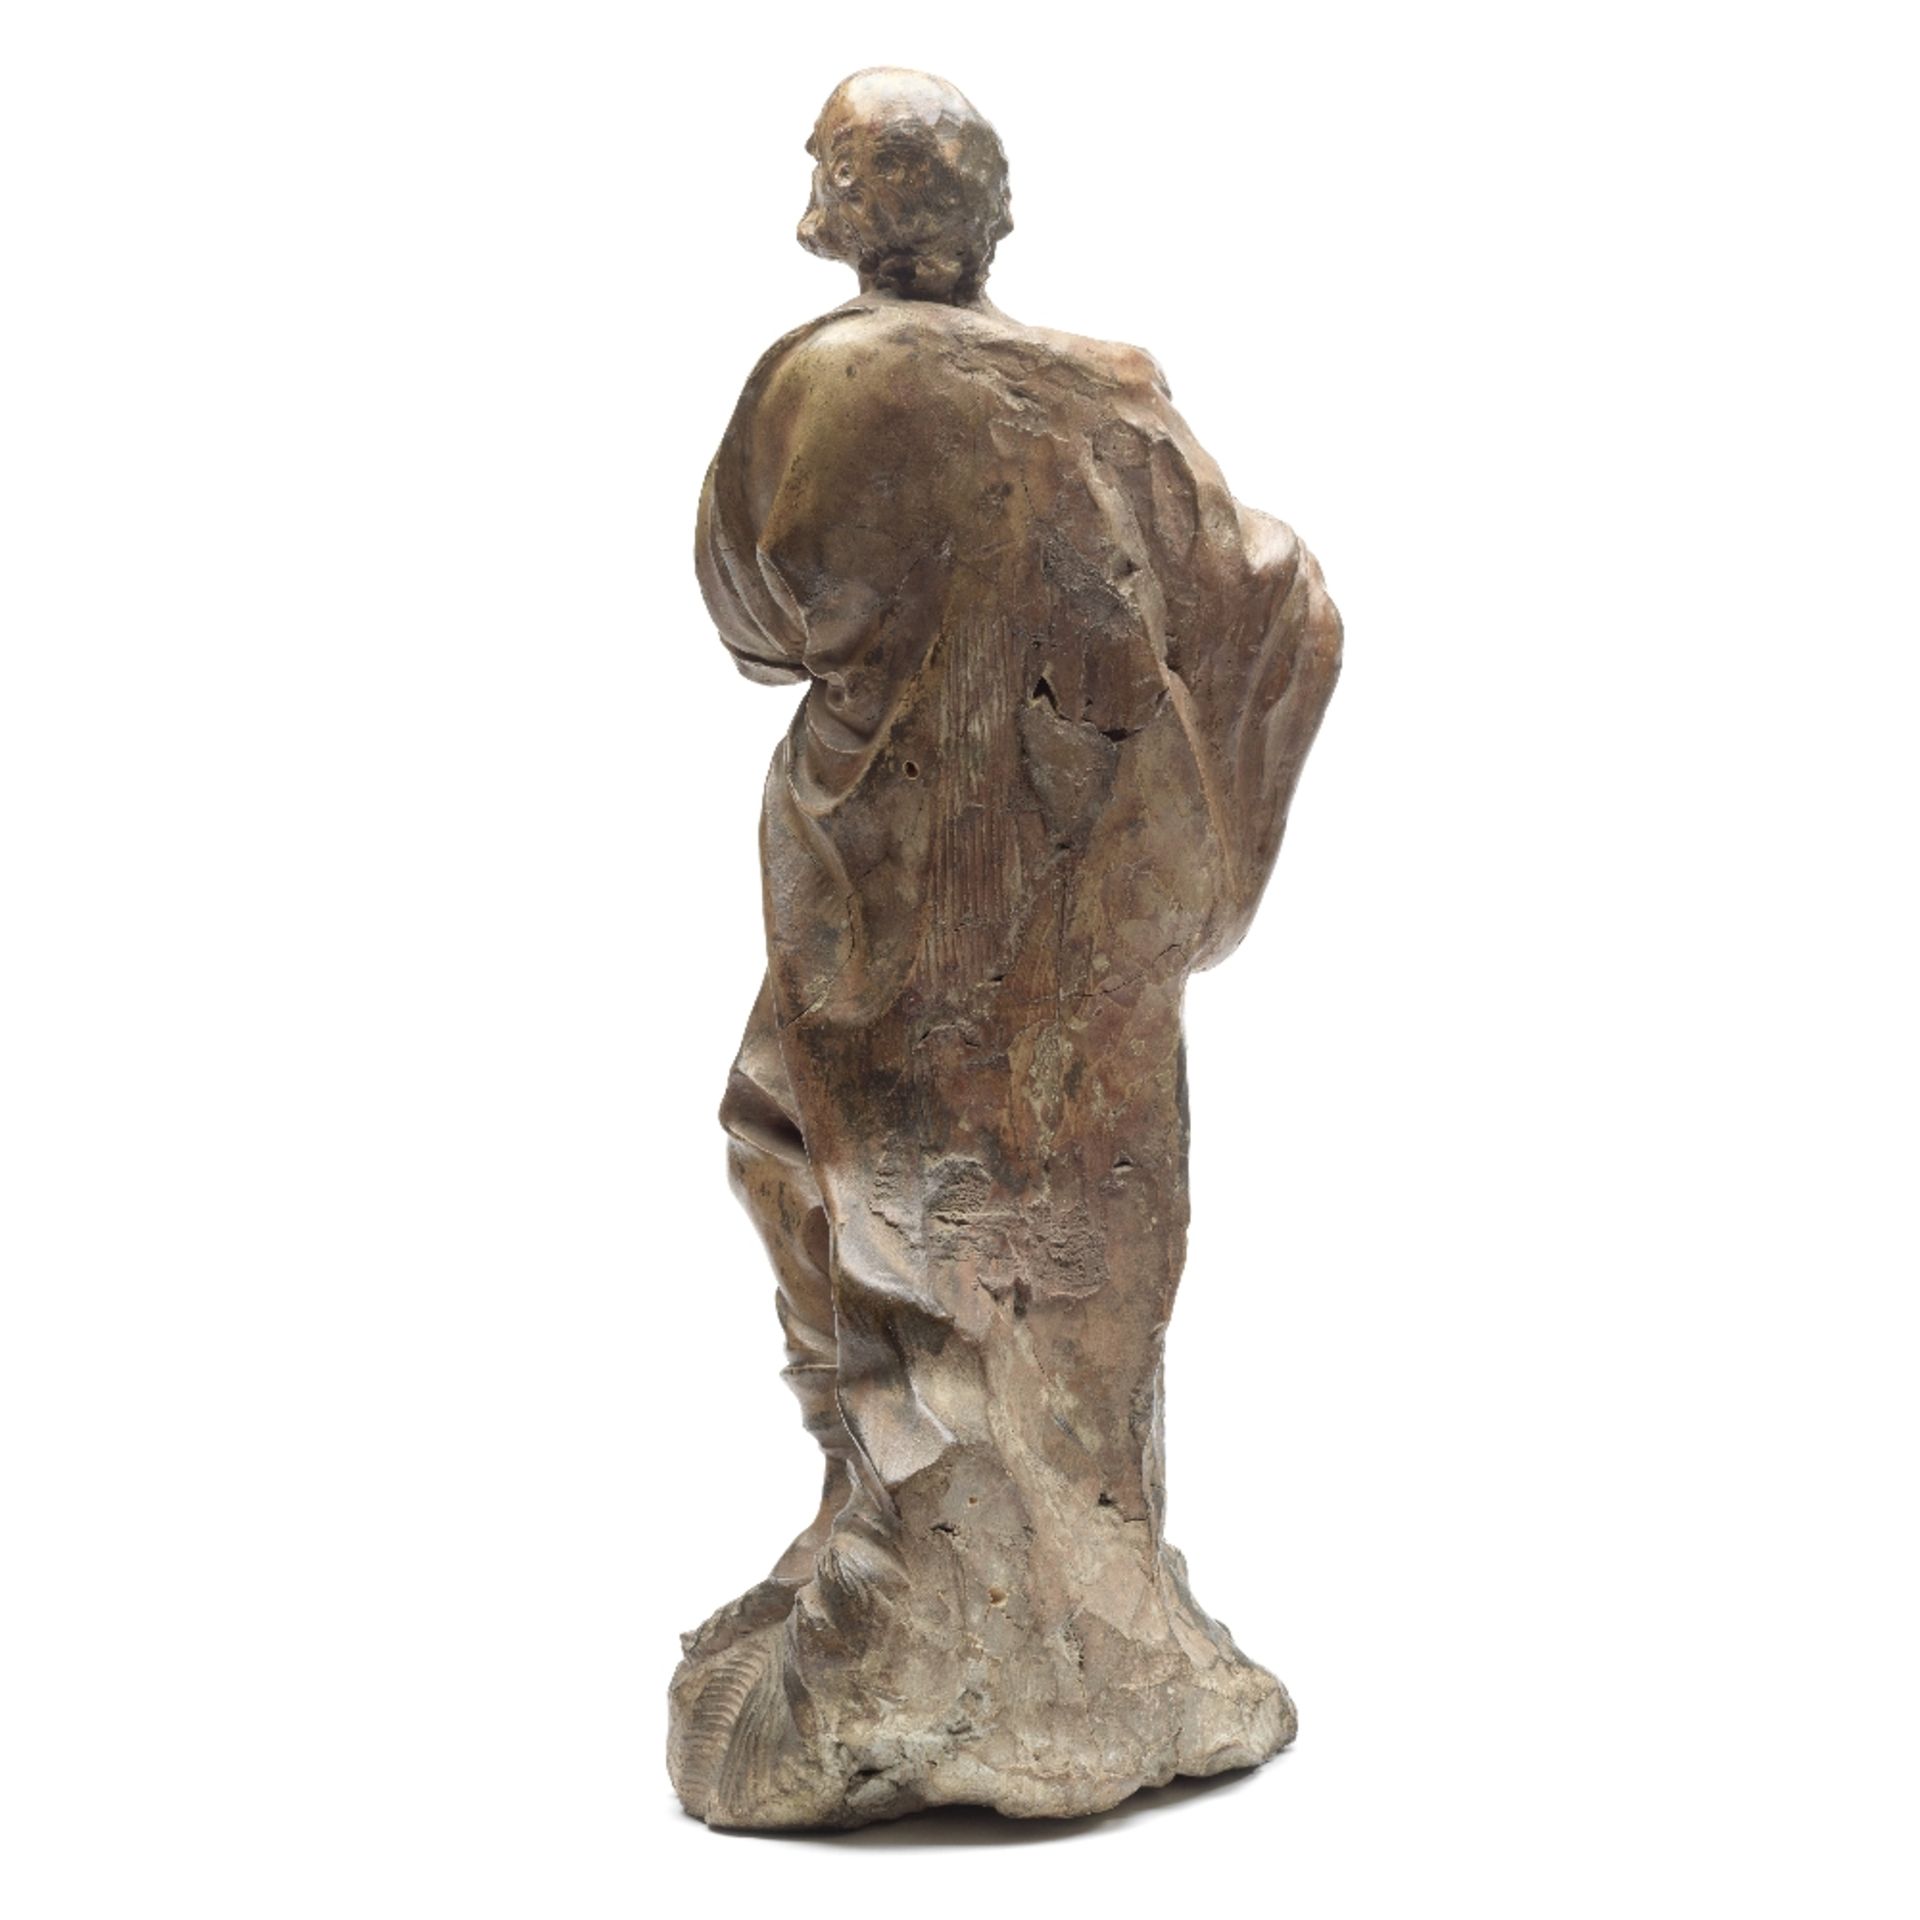 Attributed to Giuseppe Mazzuoli (Italian, 1644-125): A terracotta figure of St Peter Circa 1700 - Image 4 of 4